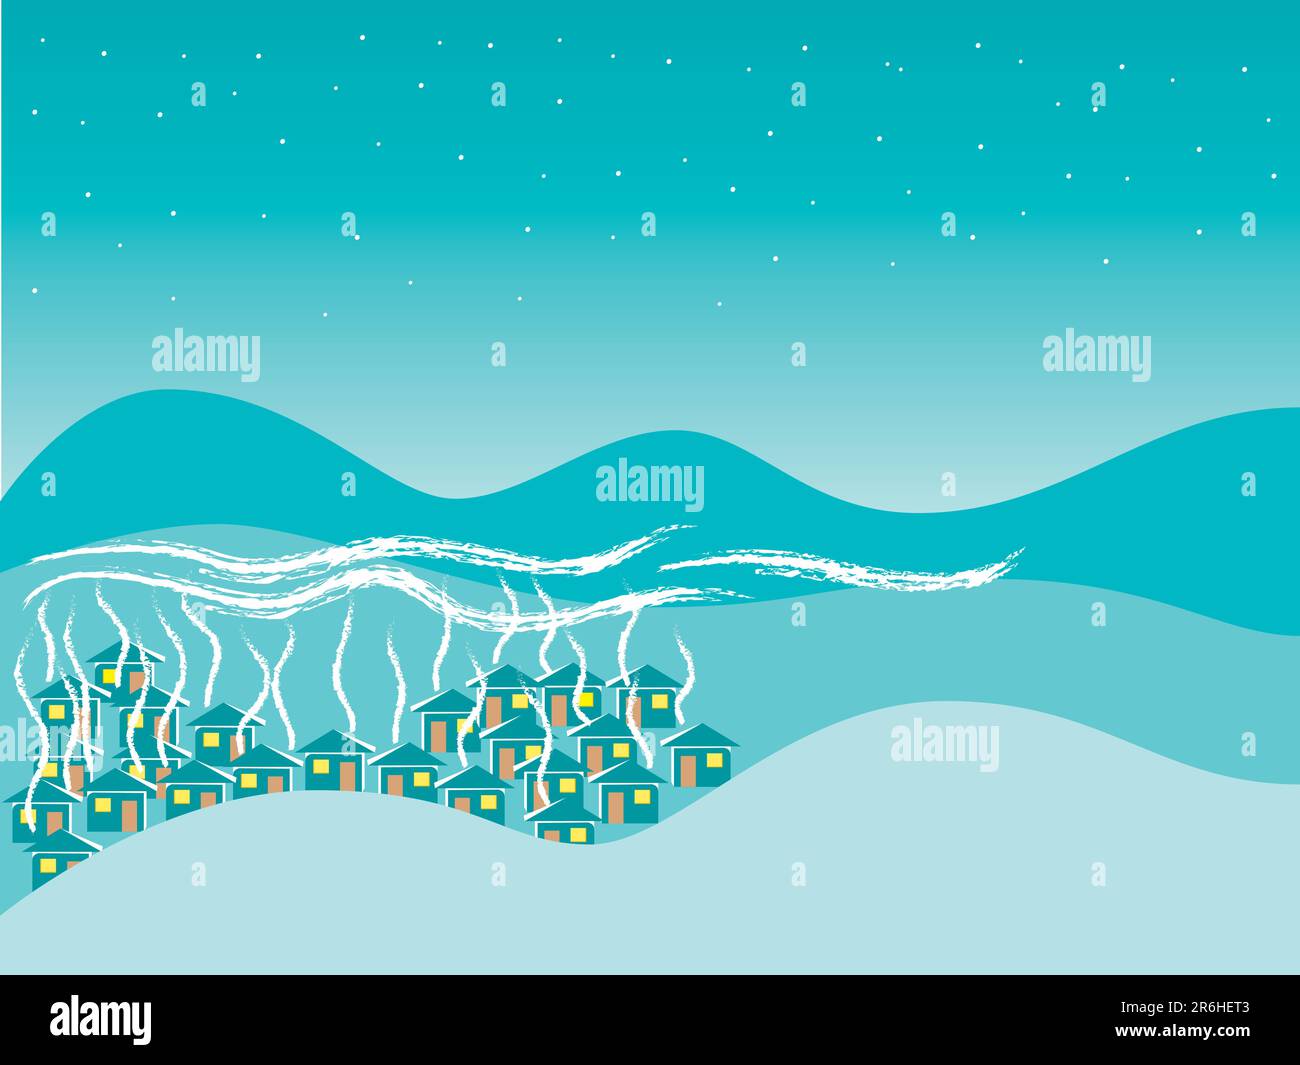 vector illustration of mountain village in blue colors Stock Vector